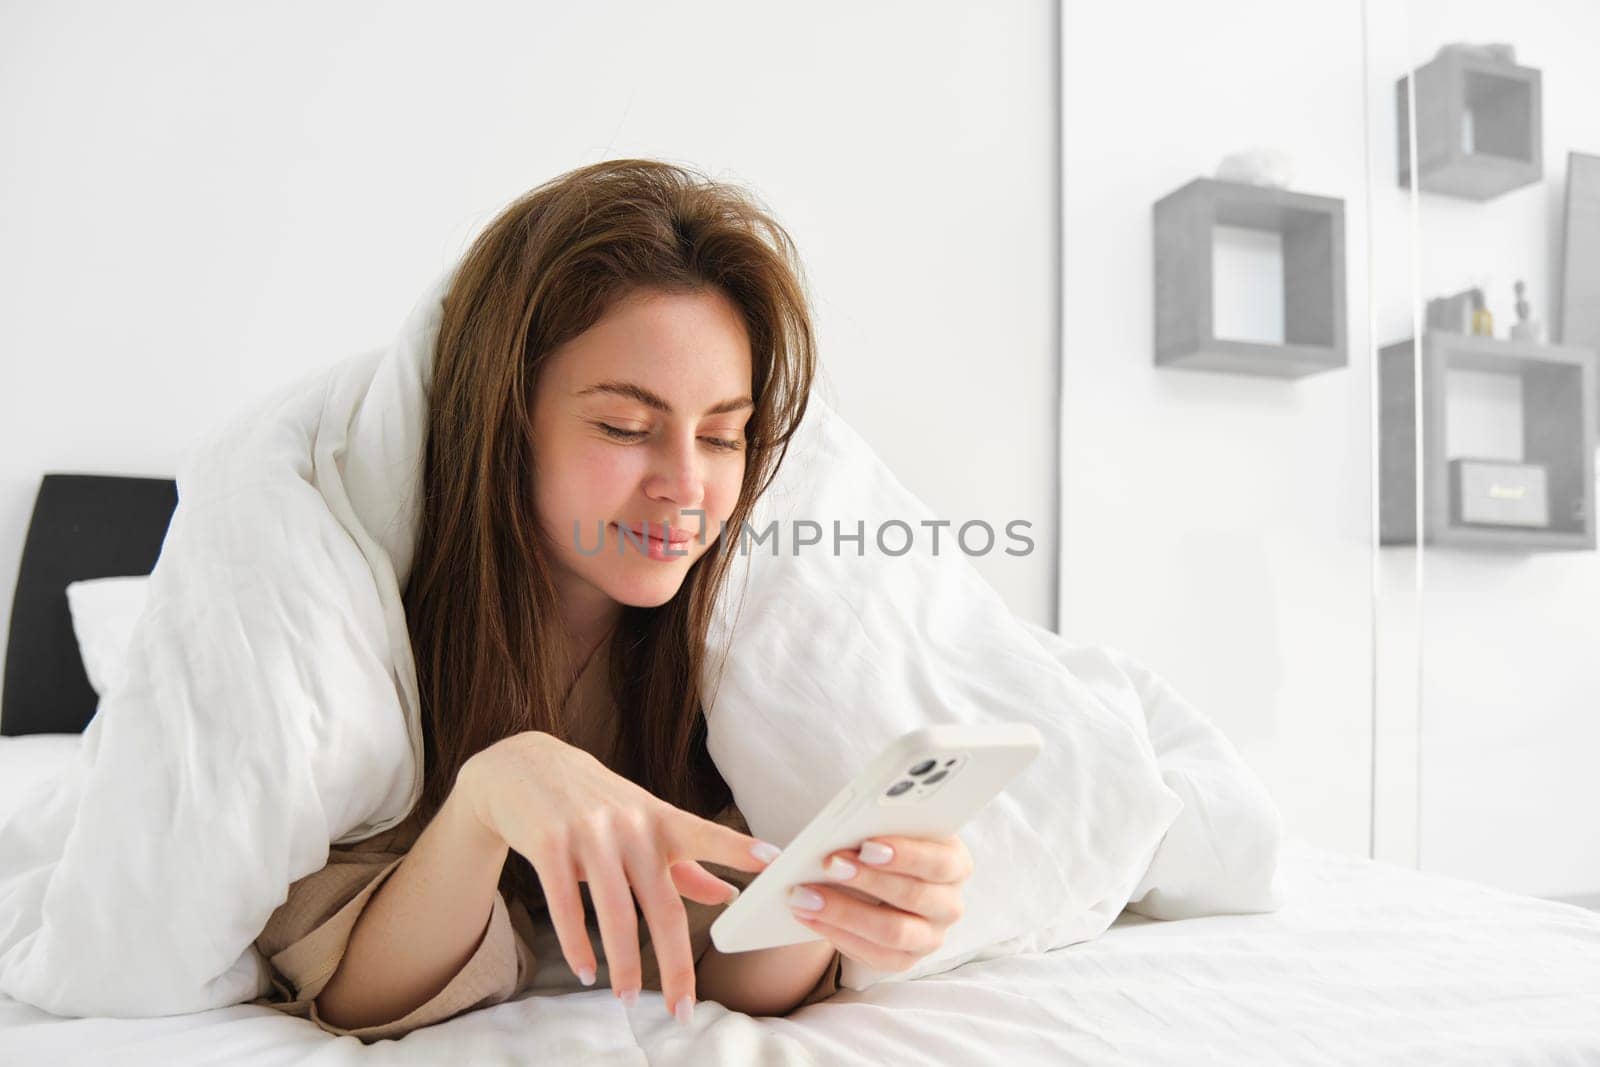 Woman in morning lying in bed covered in blanket, looking at smartphone, using mobile phone app.